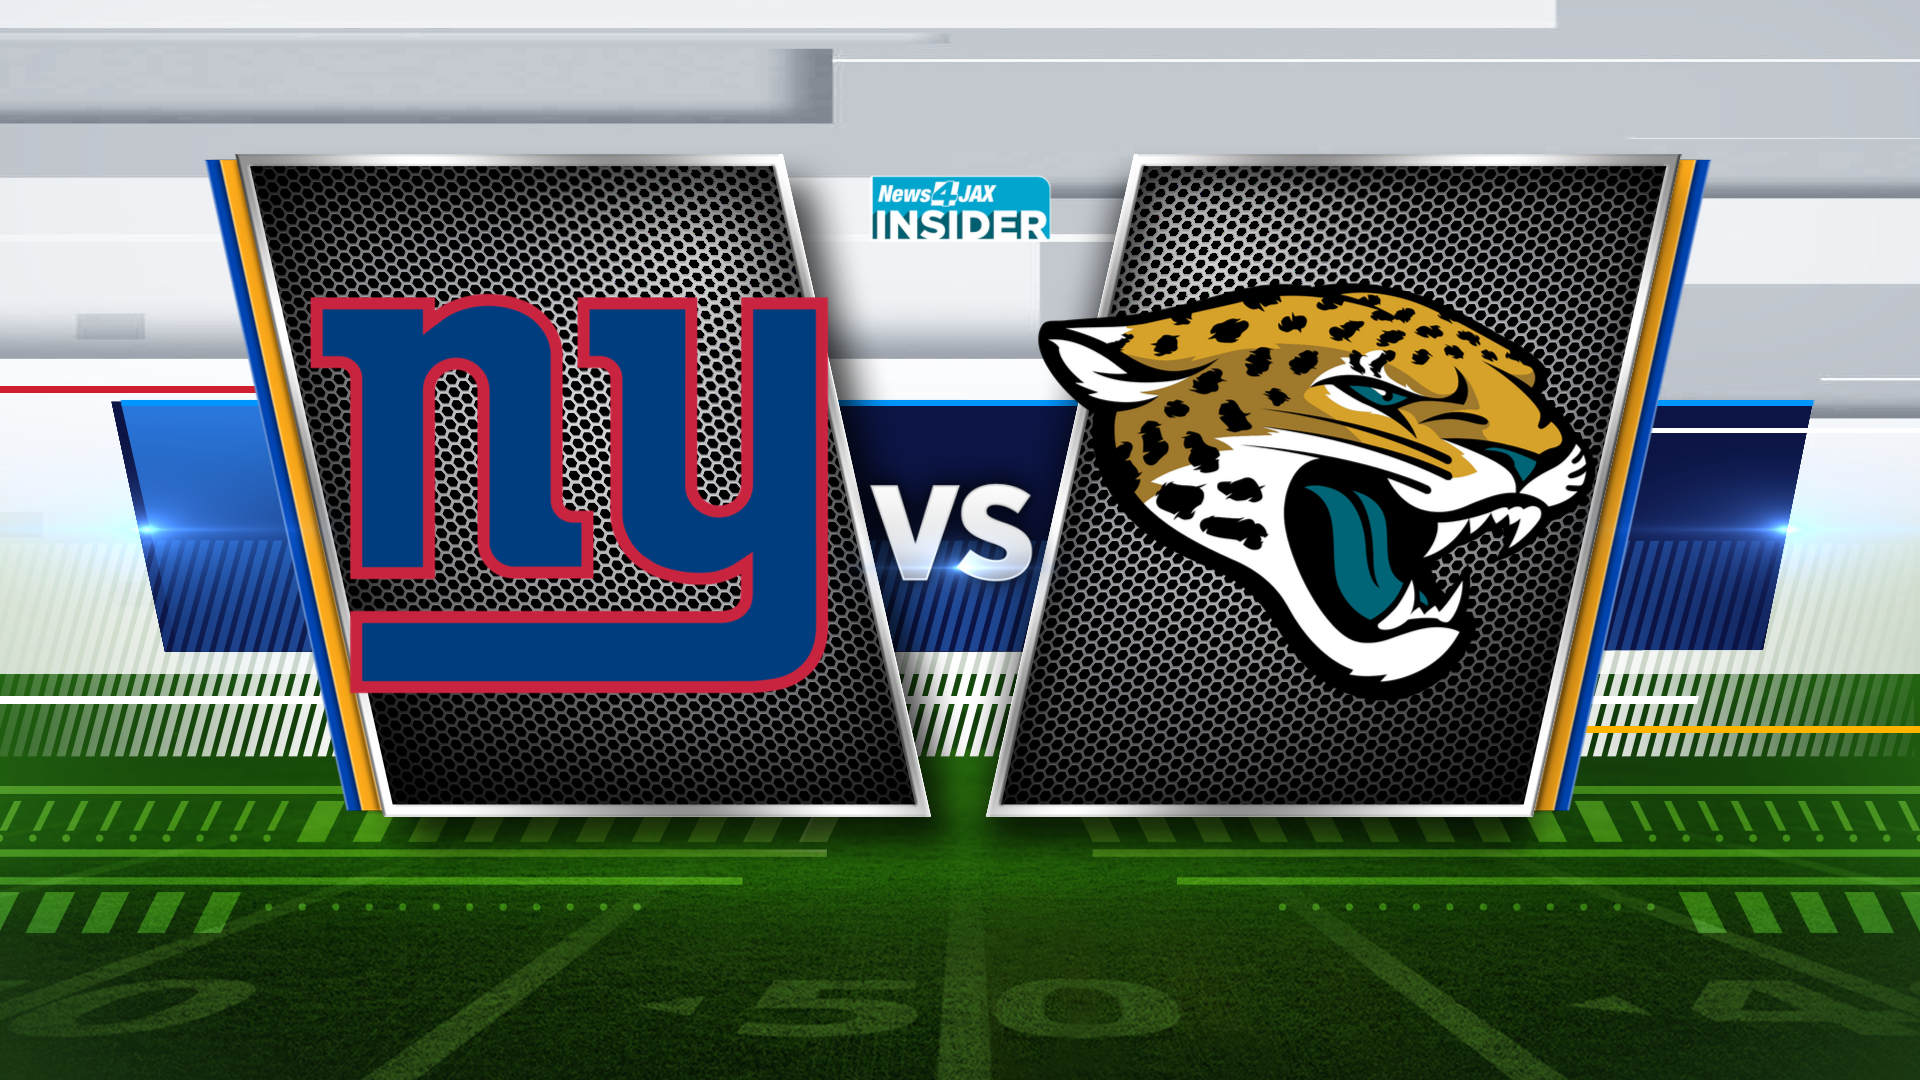 \ud83d\udd12 Cheer on the Jaguars as they take on the NY Giants